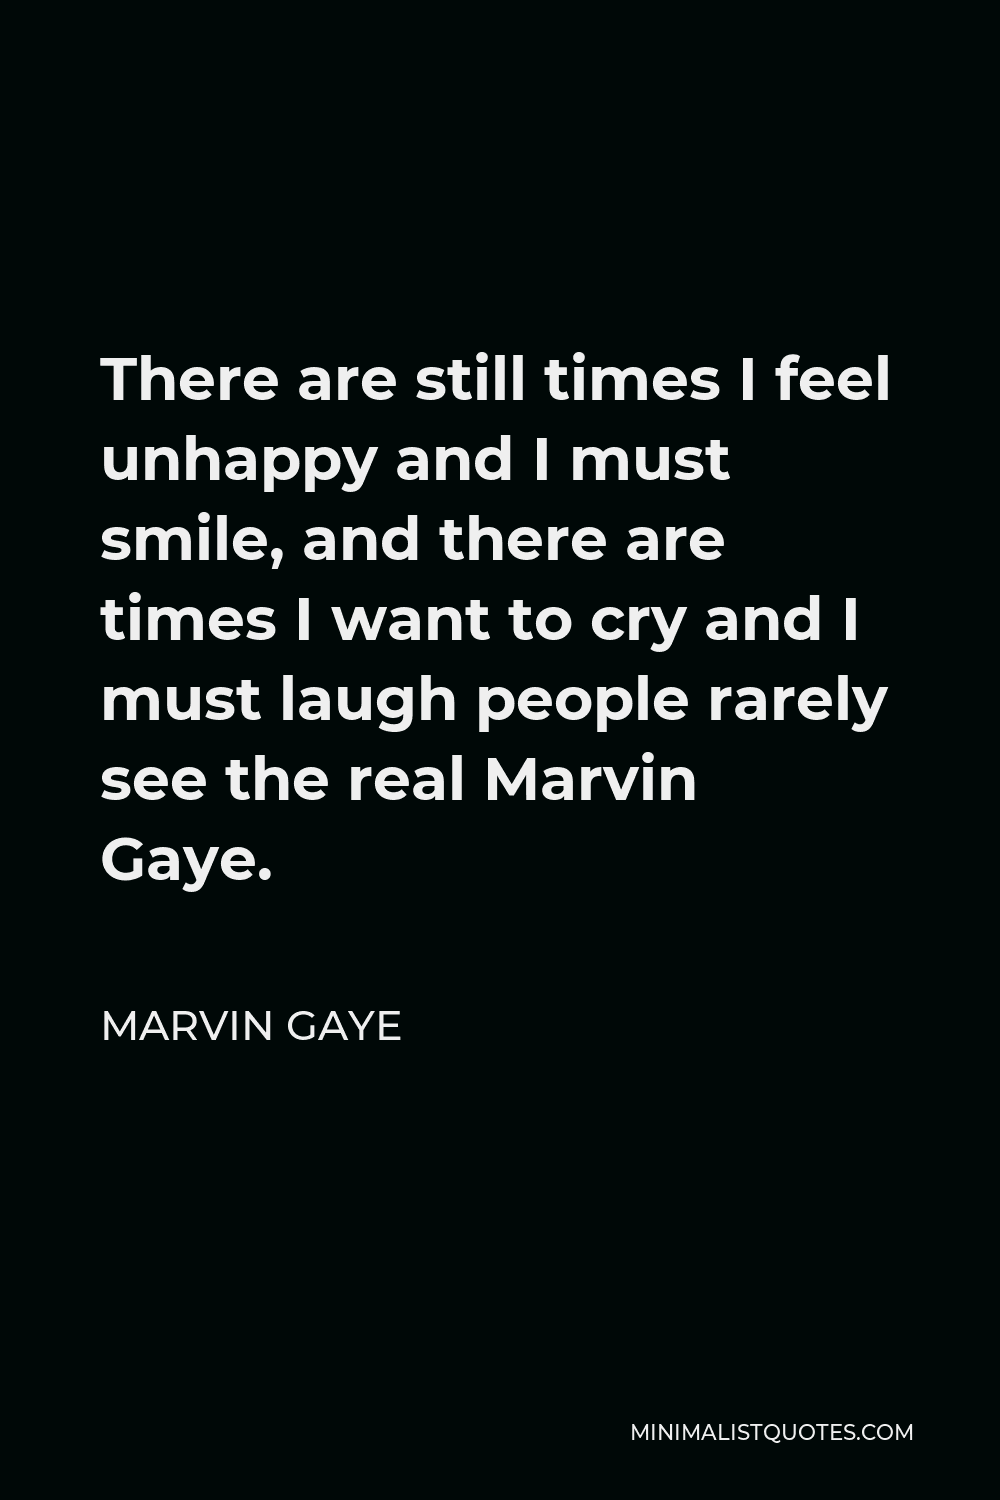 Marvin Gaye Quote - There are still times I feel unhappy and I must smile, and there are times I want to cry and I must laugh people rarely see the real Marvin Gaye.